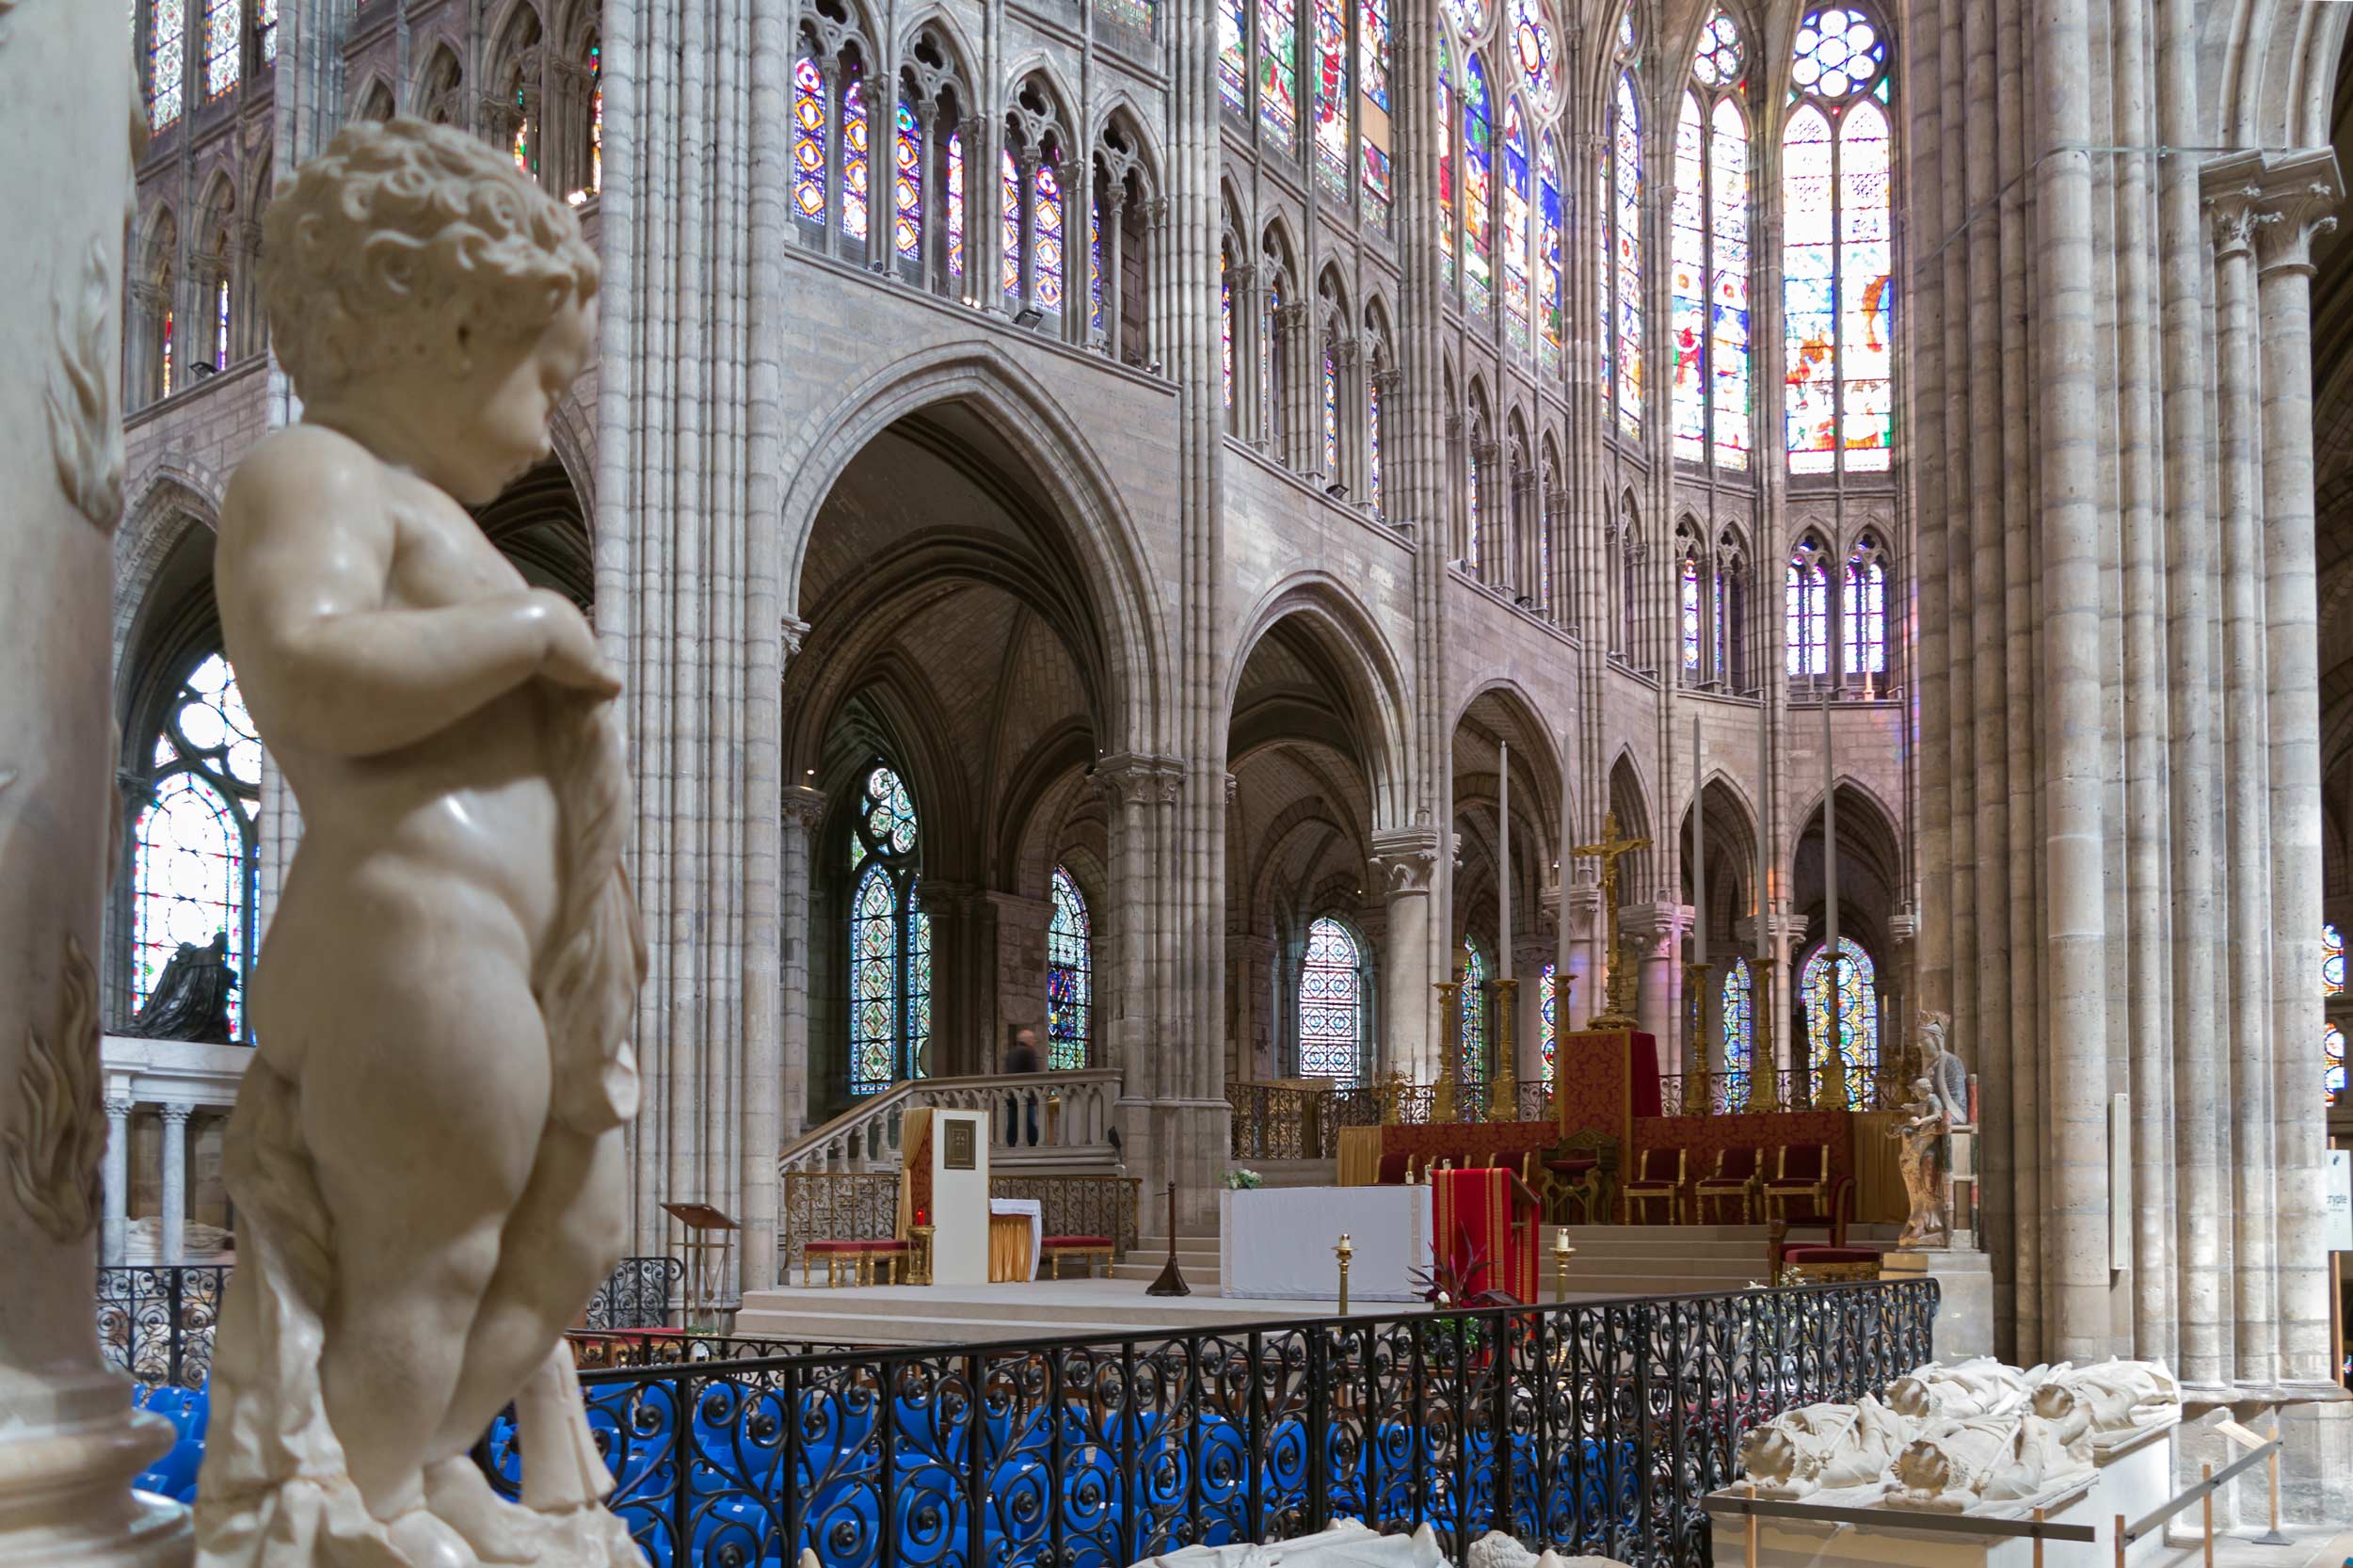 Stained glass windows, arches and cherubic statues in the interior of a Gothic cathedral